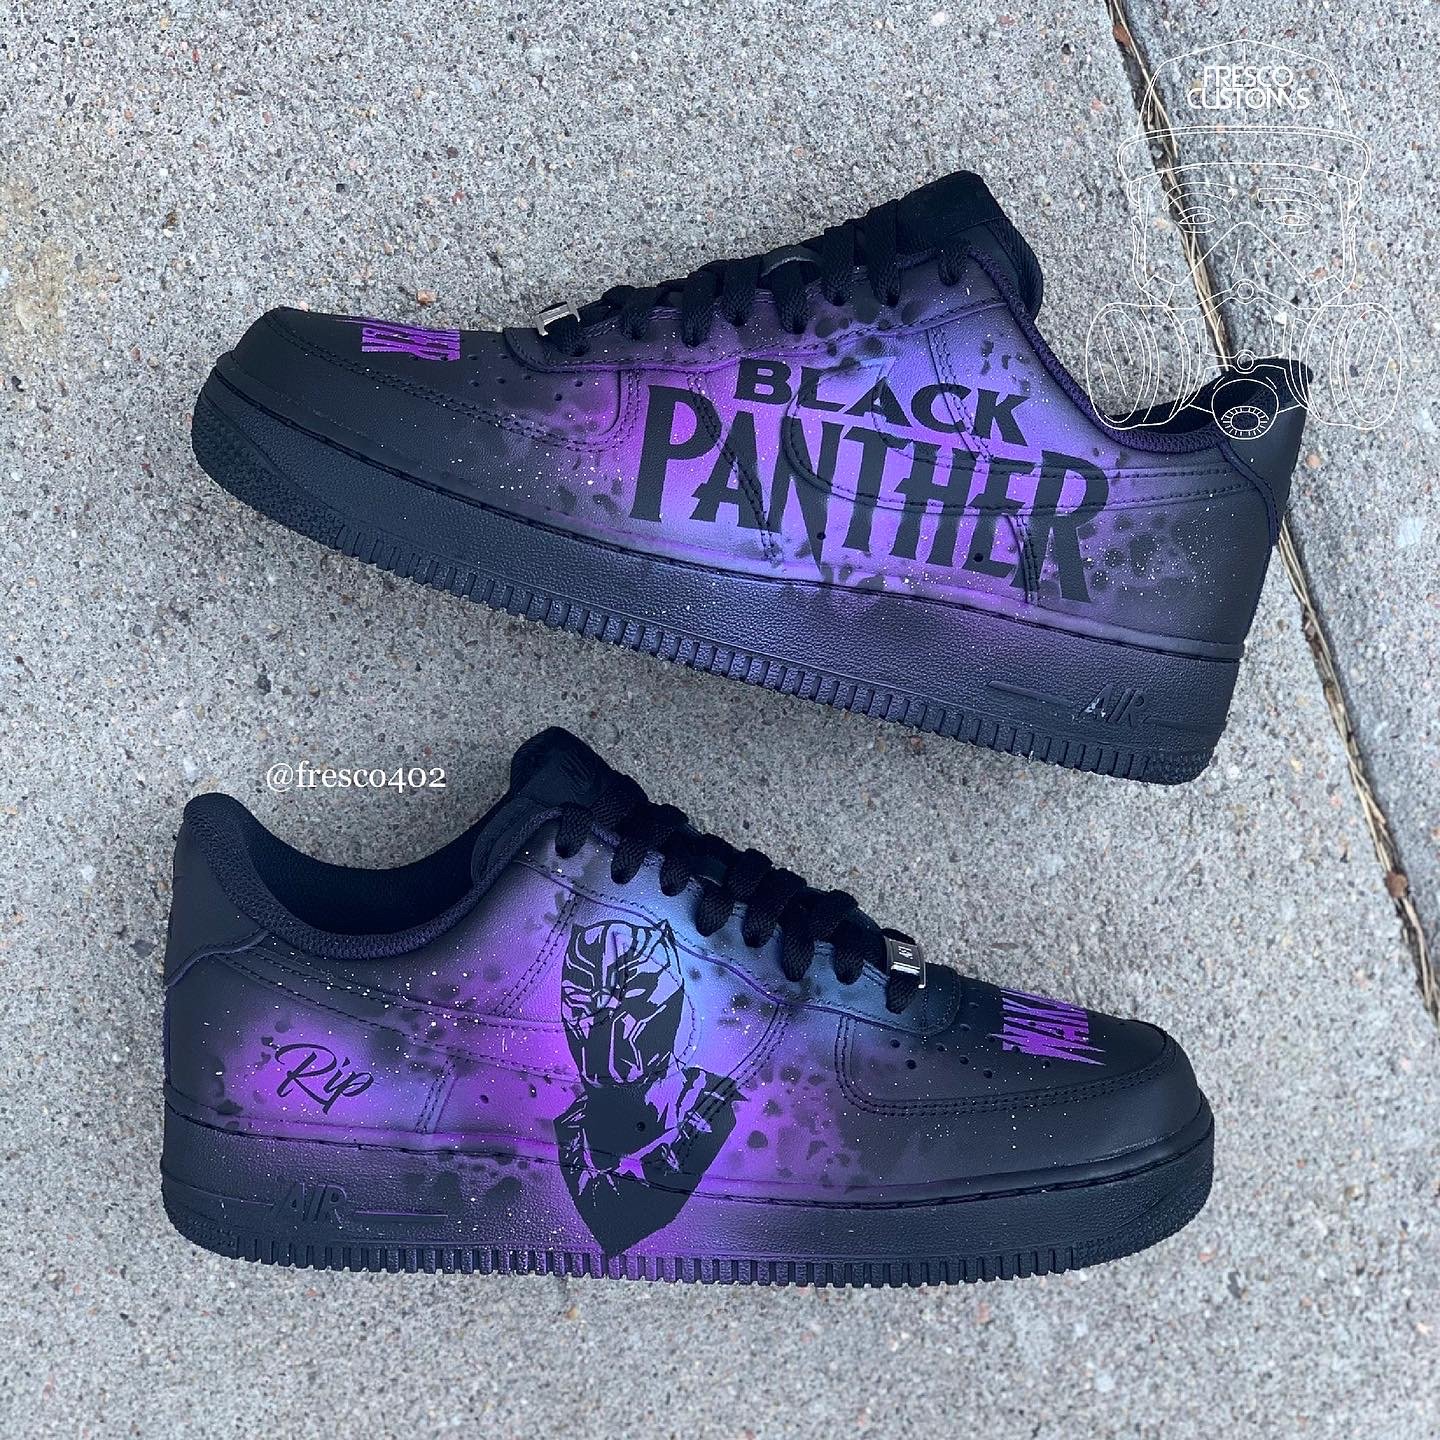 black panther custom shoes